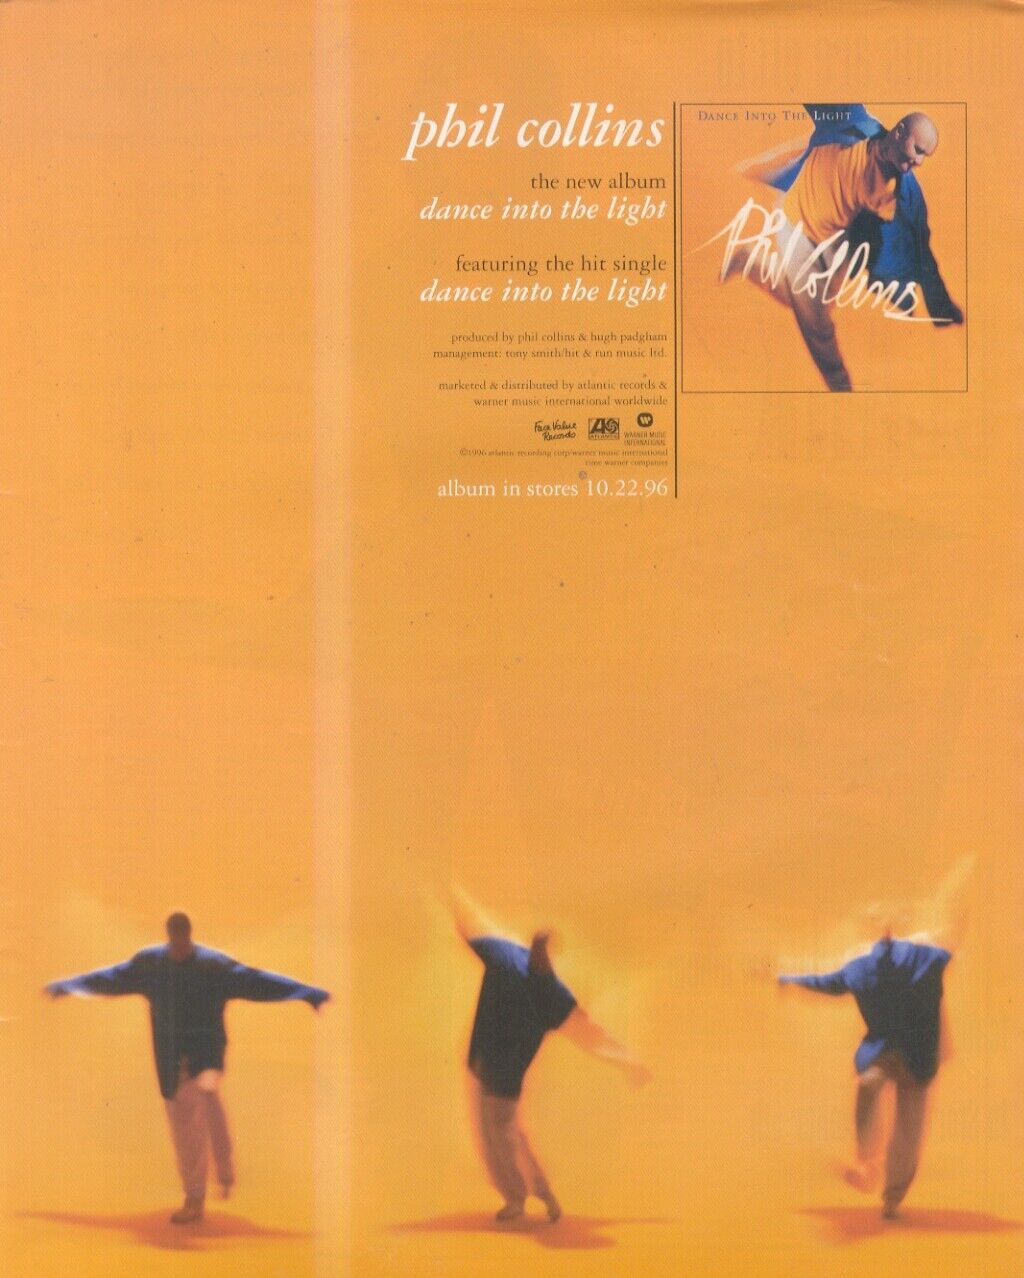 HFBK41 PICTURE/ADVERT 13X11 PHIL COLLINS : DANCE INTO THE LIGHT